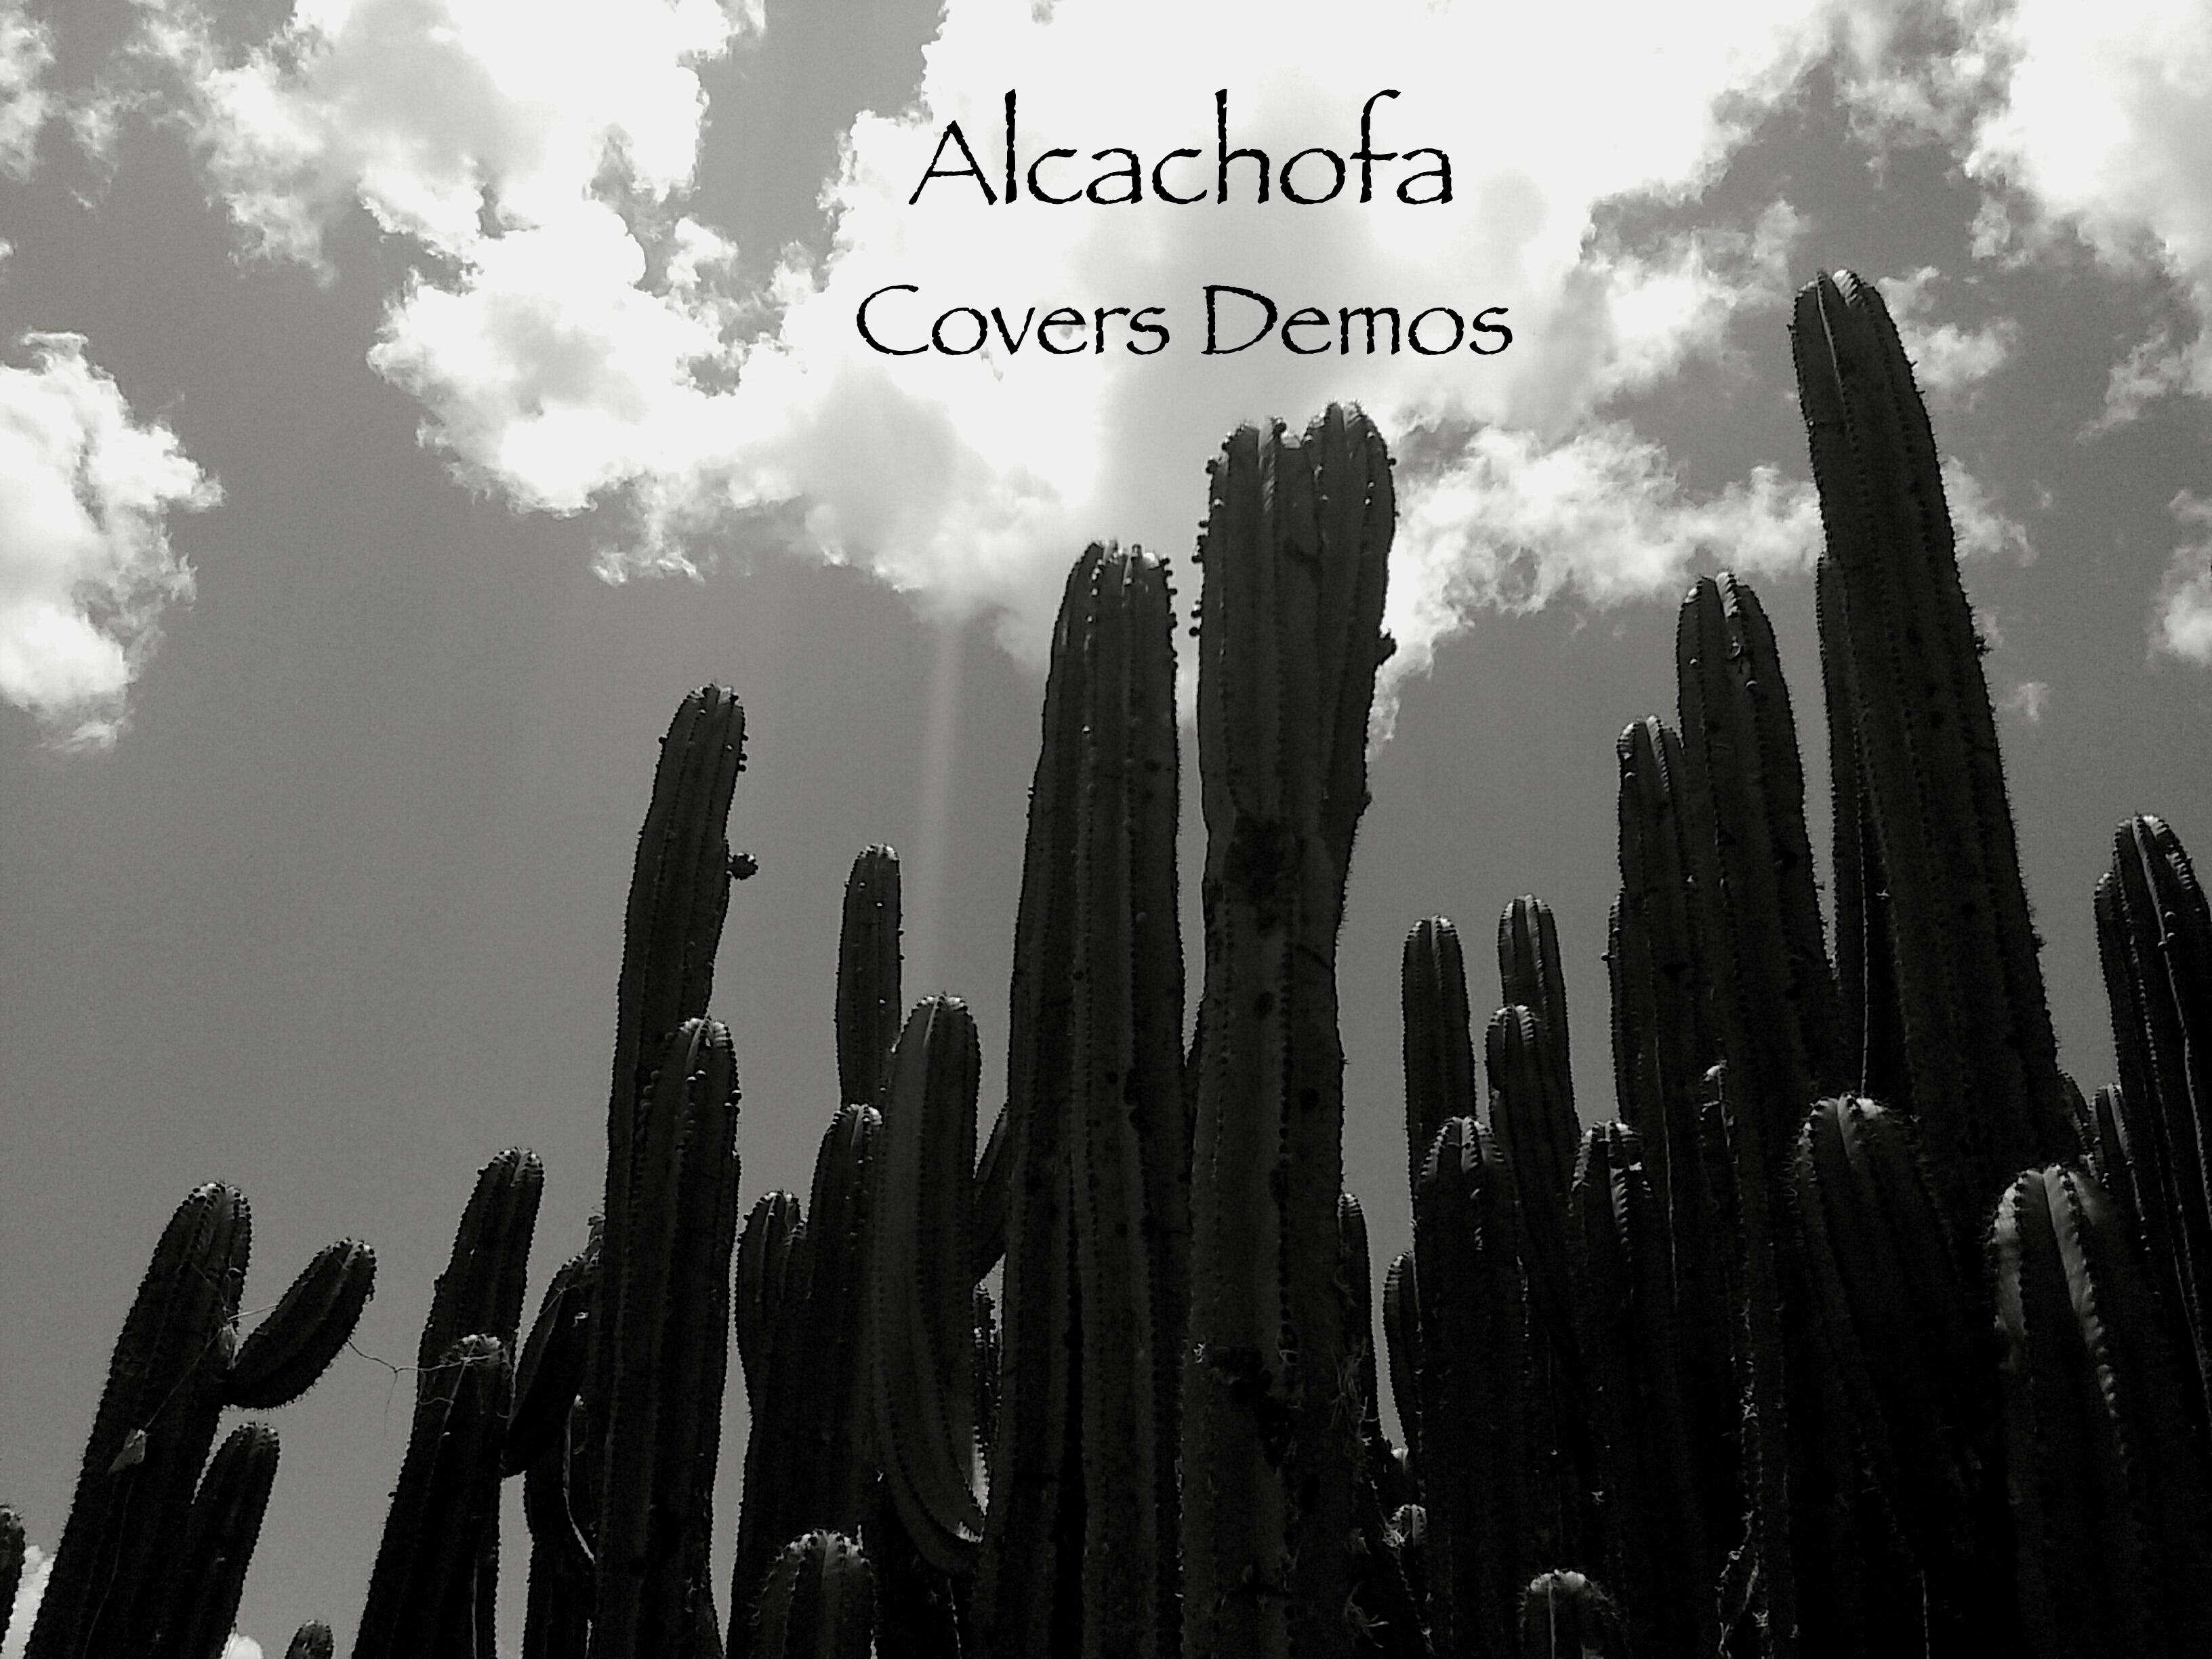 Covers demos